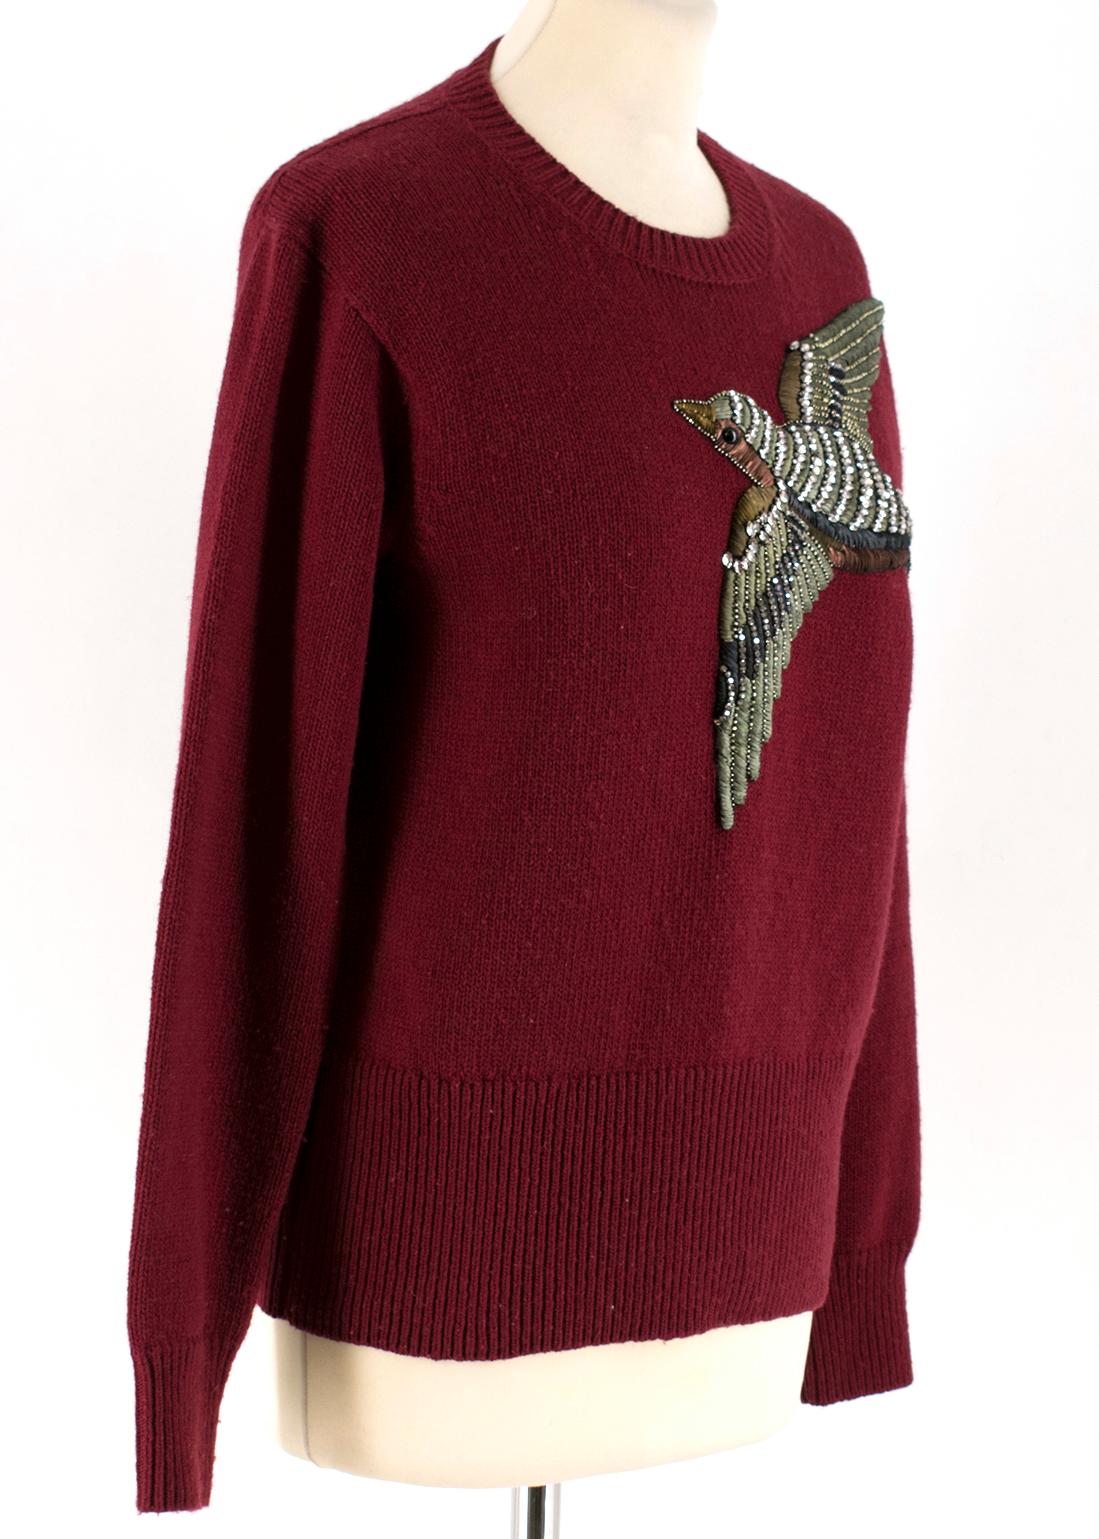 Gucci Burgundy Bird Embellished Knit Wool Sweater

- Wool burgundy sweater
- Round neckline
- Bird embellishment made of silk ribbon and white crystals

Please note, these items are pre-owned and may show some signs of storage, even when unworn and